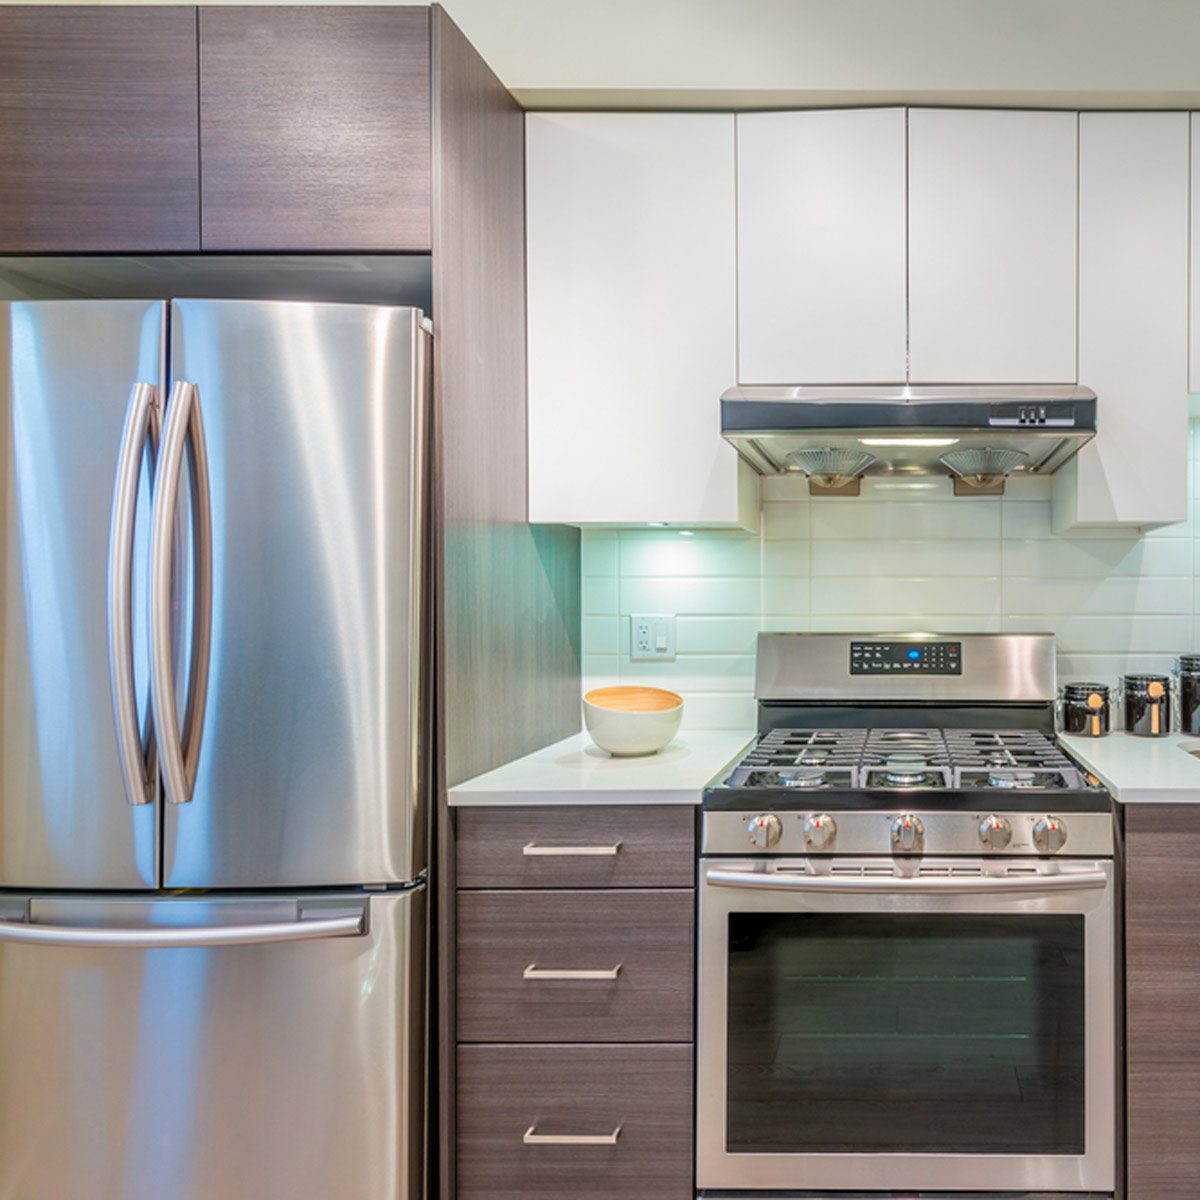 The Pros and Cons of Stainless Steel Appliances in the Kitchen